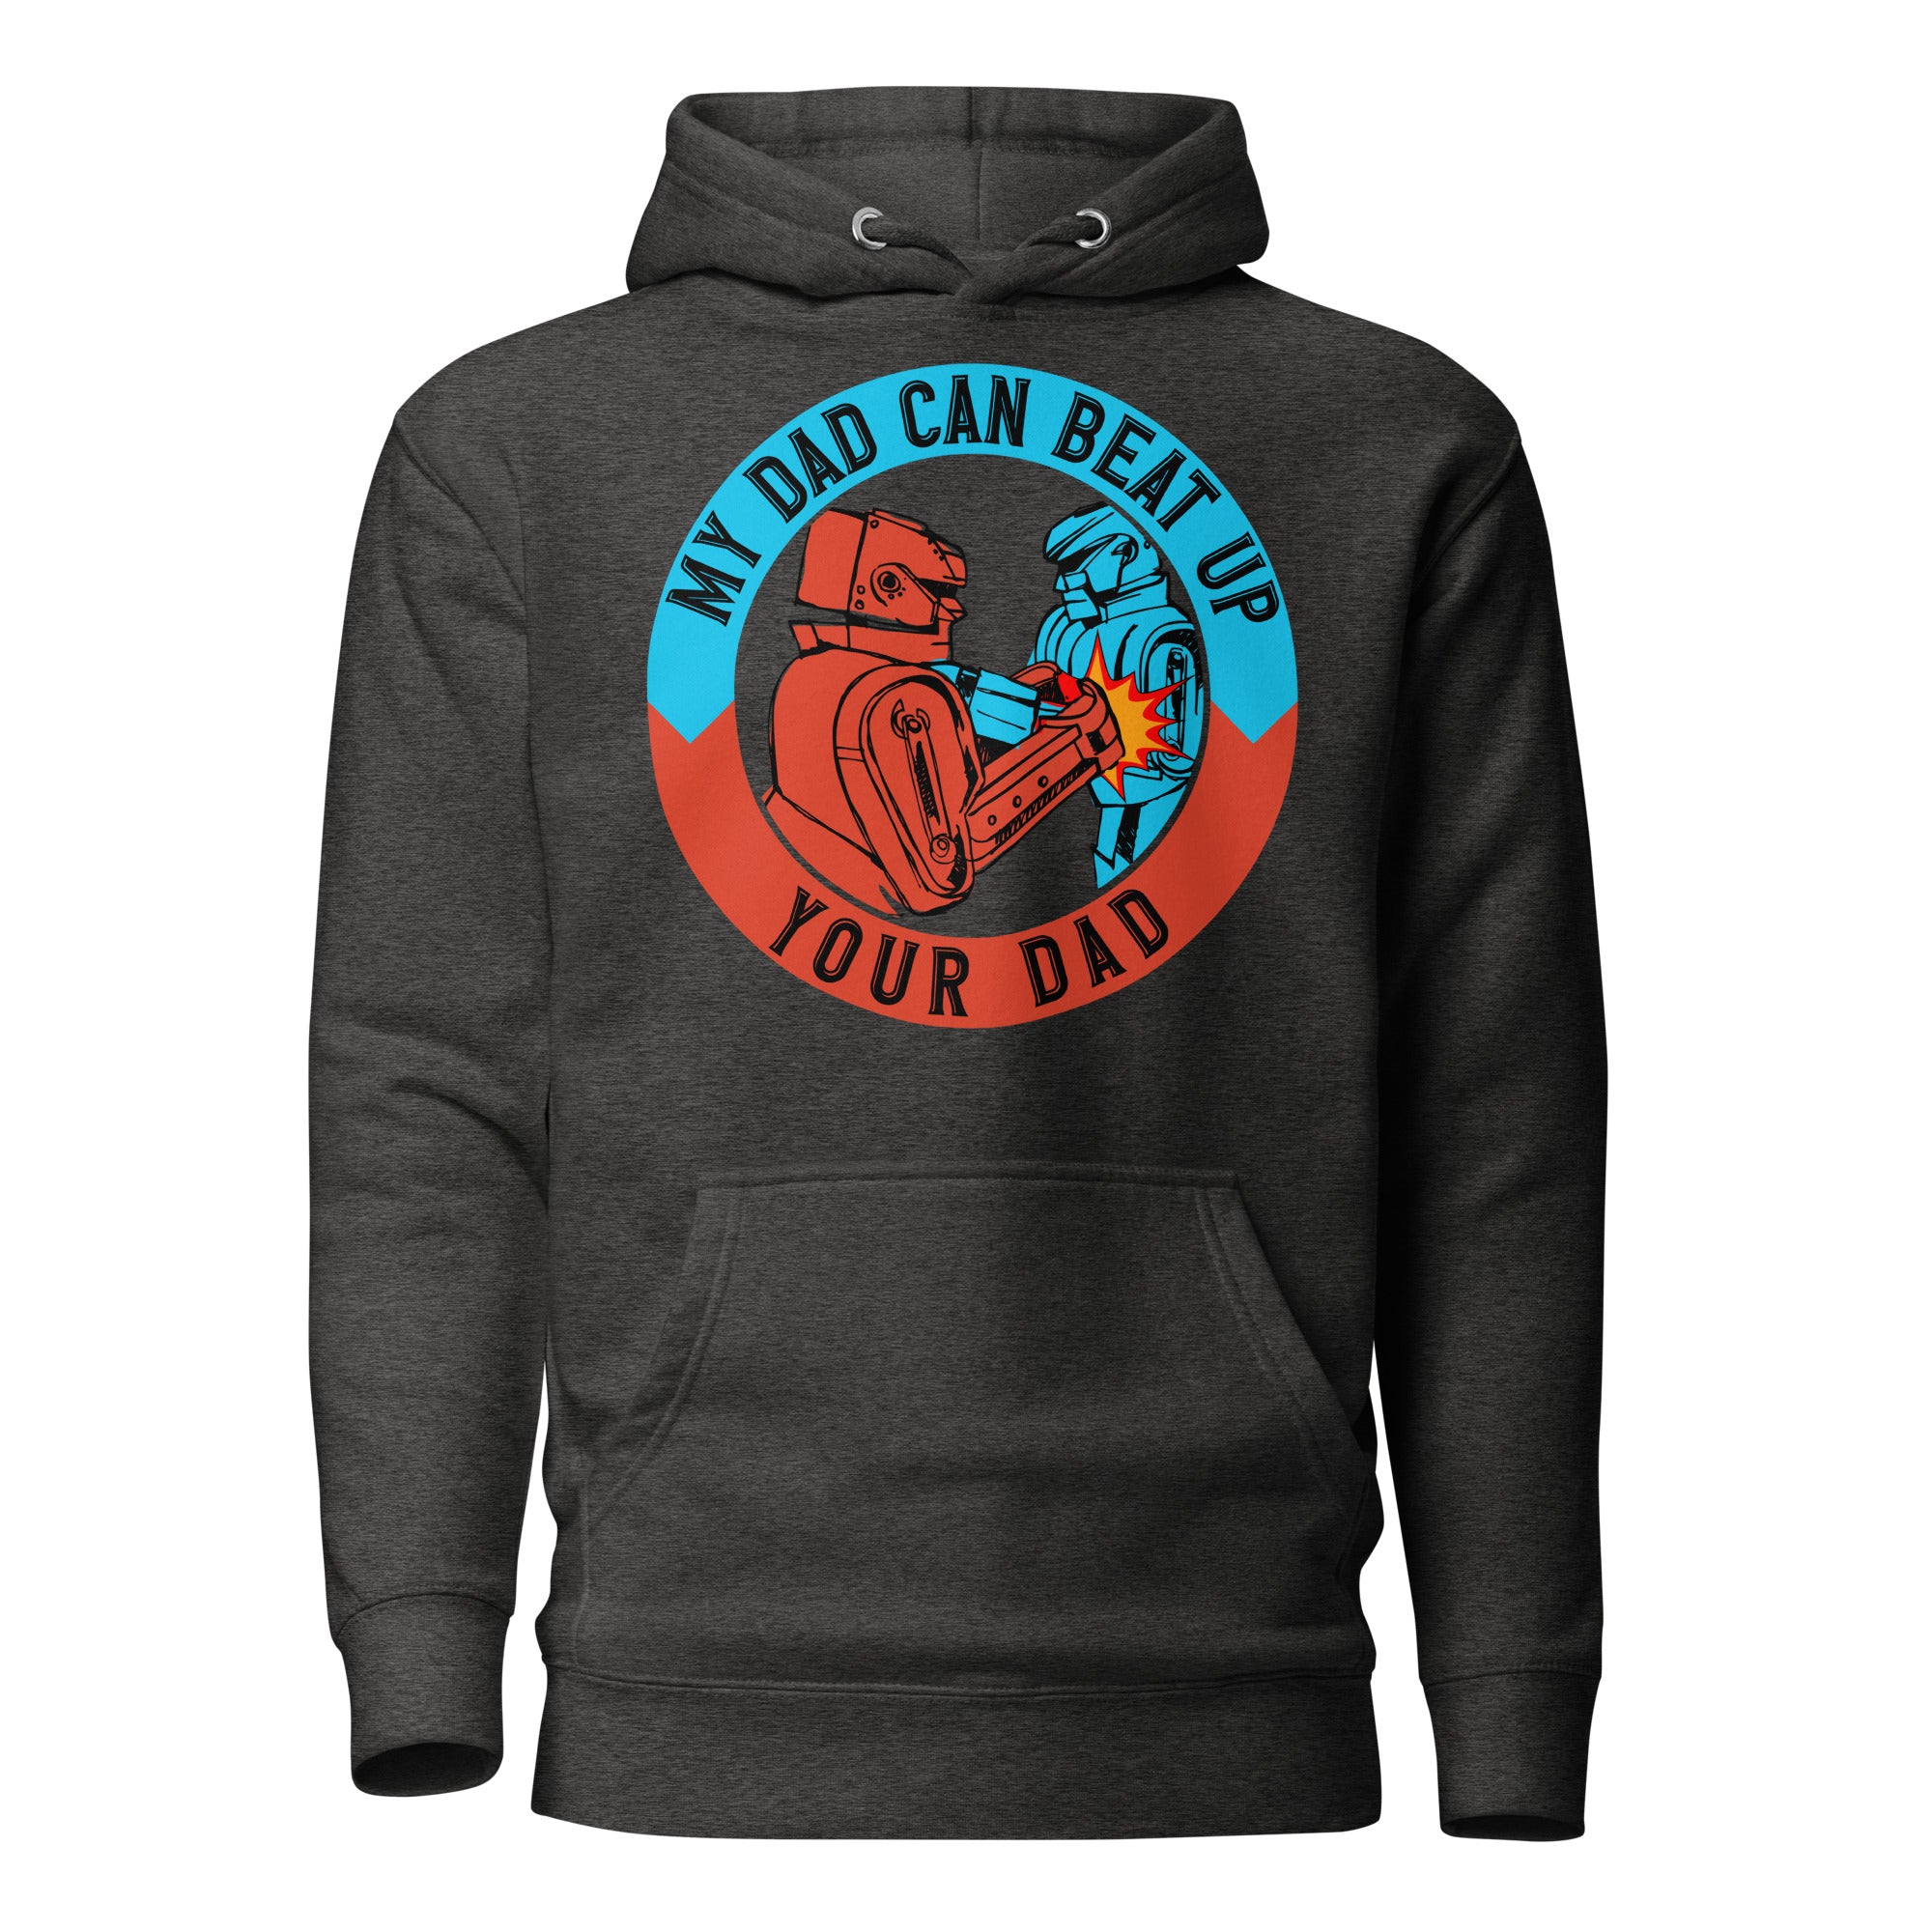 My Dad Can Beat Up Your Dad Men's Heavy Hoodie